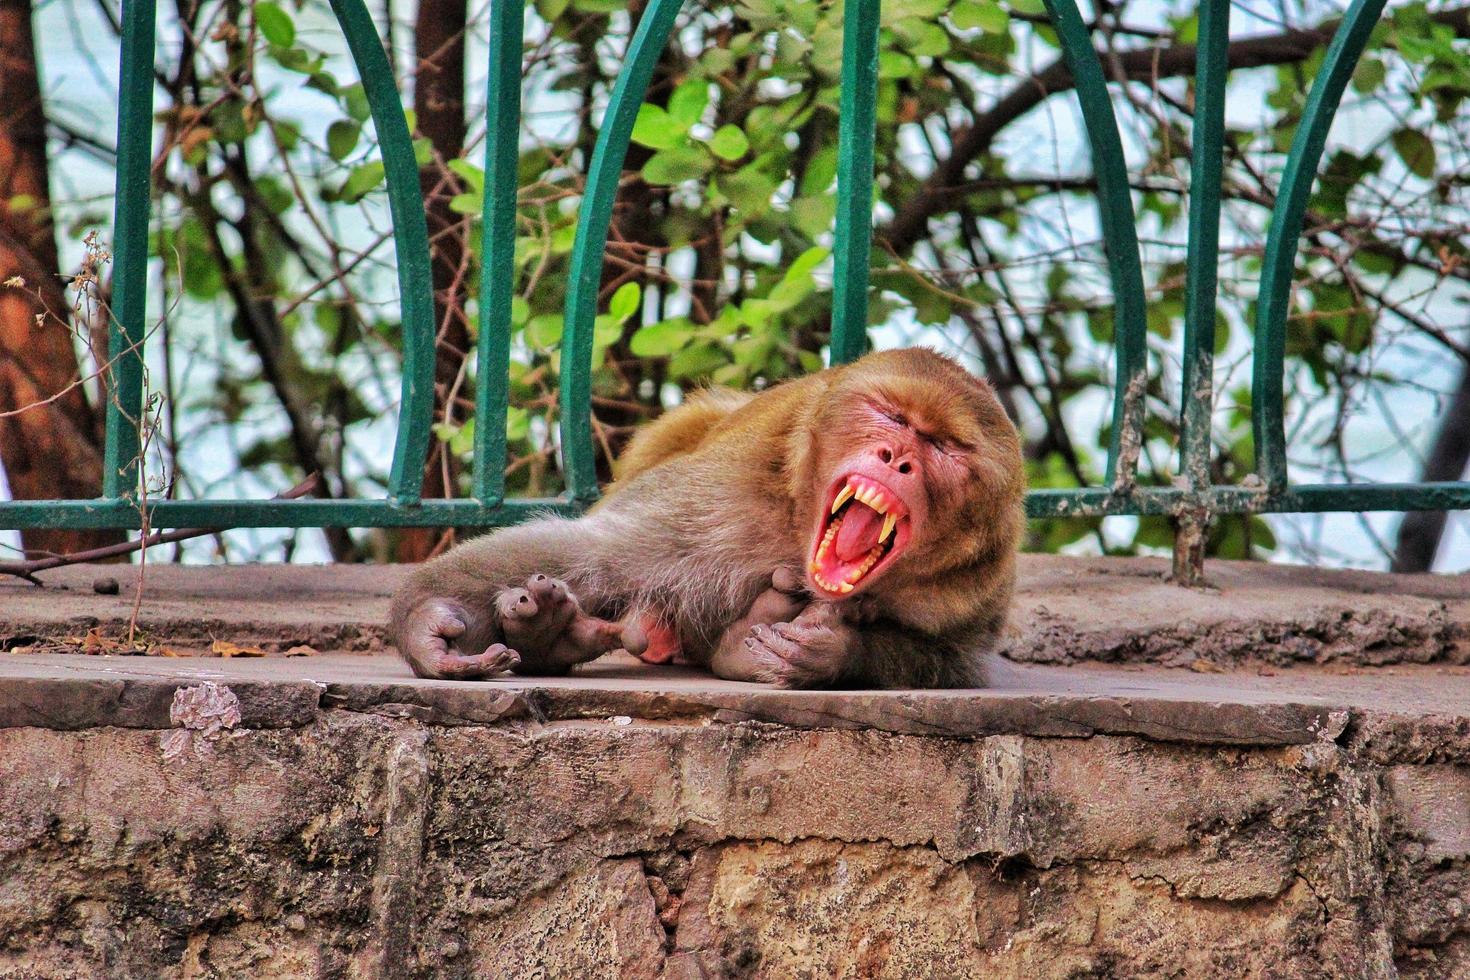 Closeup shot of an aggressive monkey in the zoo photo